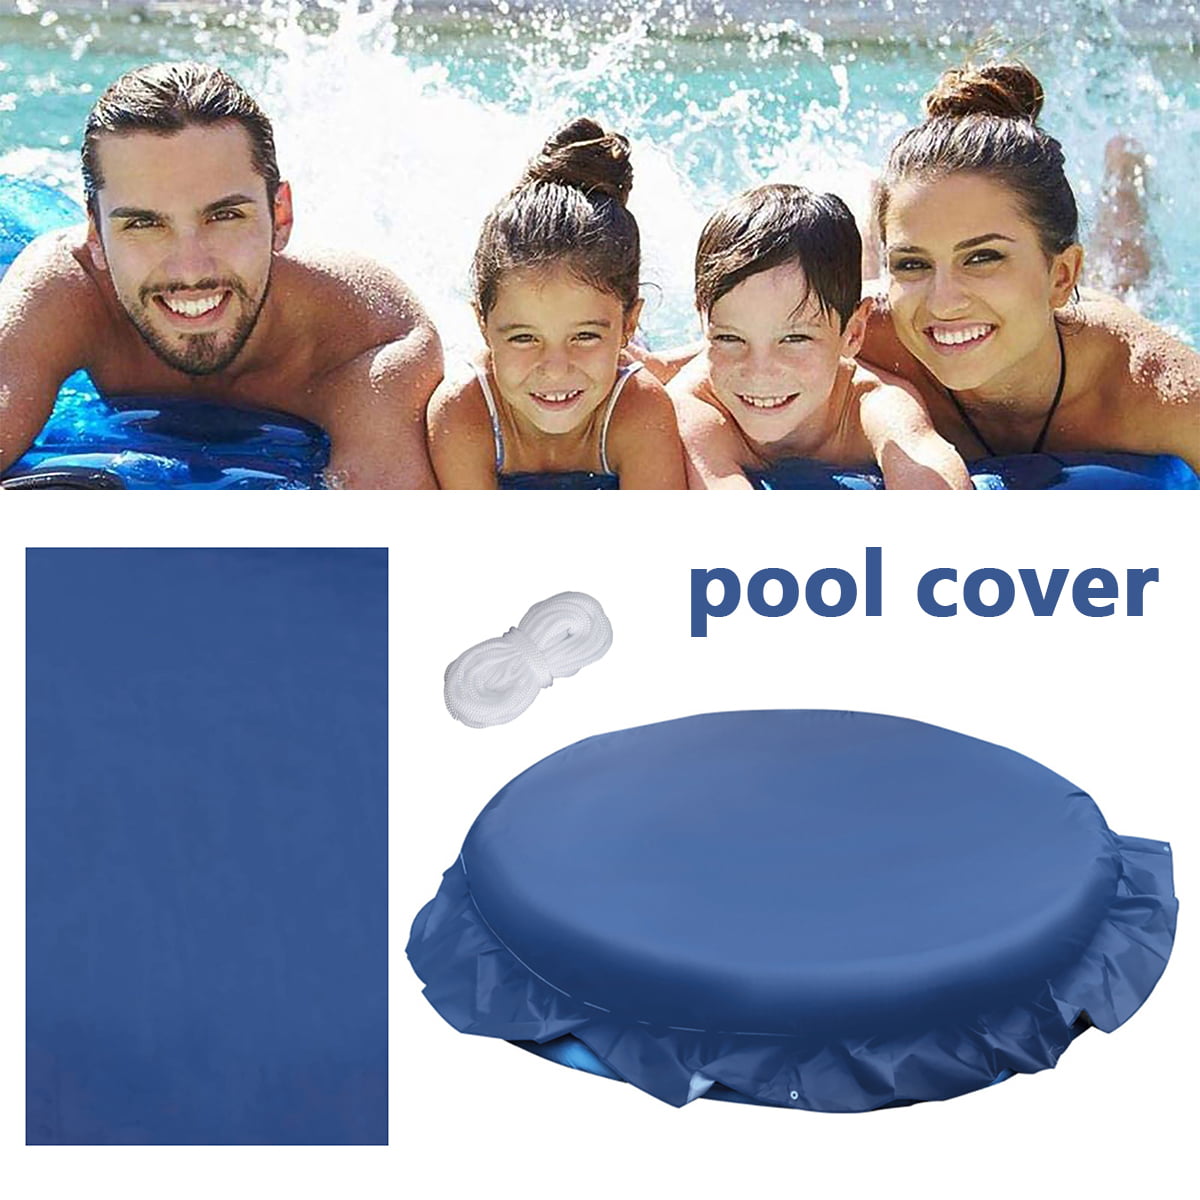 Duety Blue Pool Cover, Rope Fixation Above Ground Pool Inflatable Pool  Cover Frame Pool,Dustproof Rainproof Waterproofcovers Protector 